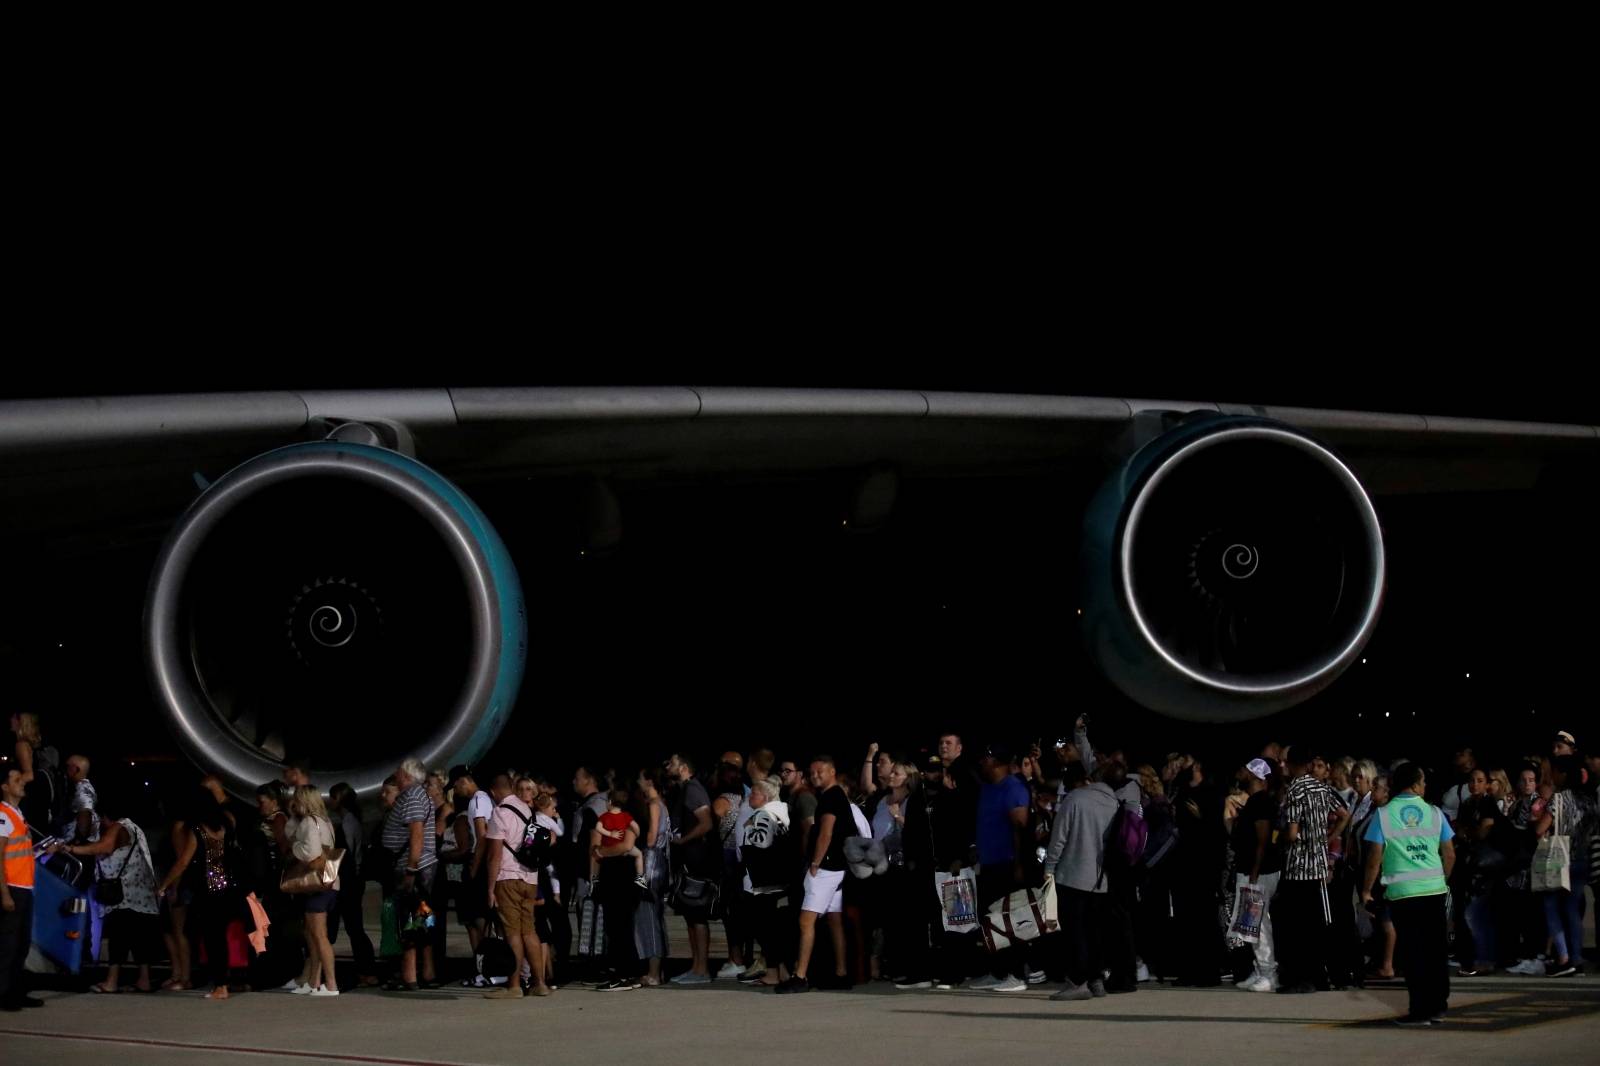 British passengers board an Airbus A380 airliner that is being used for transporting Thomas Cook customers at Dalaman Airport